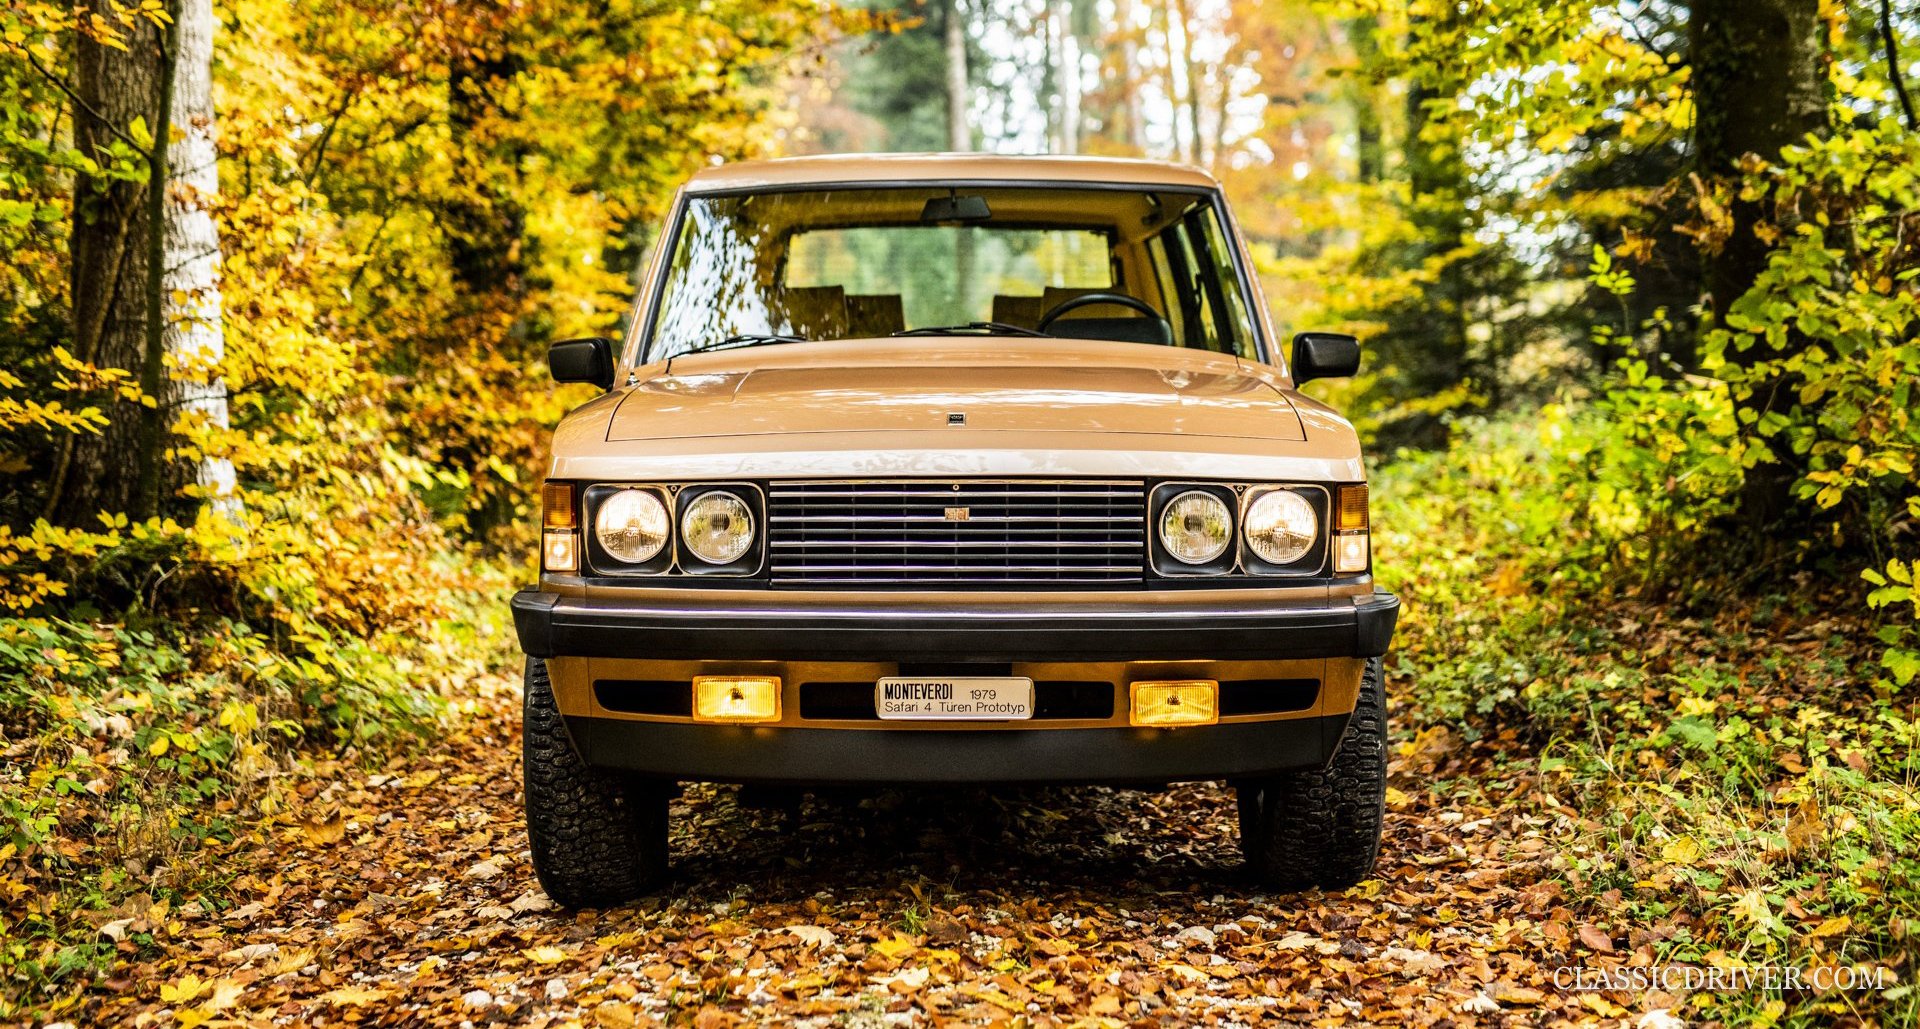 The Monteverdi Safari was a mythical SUV beast made in Switzerland<br />
